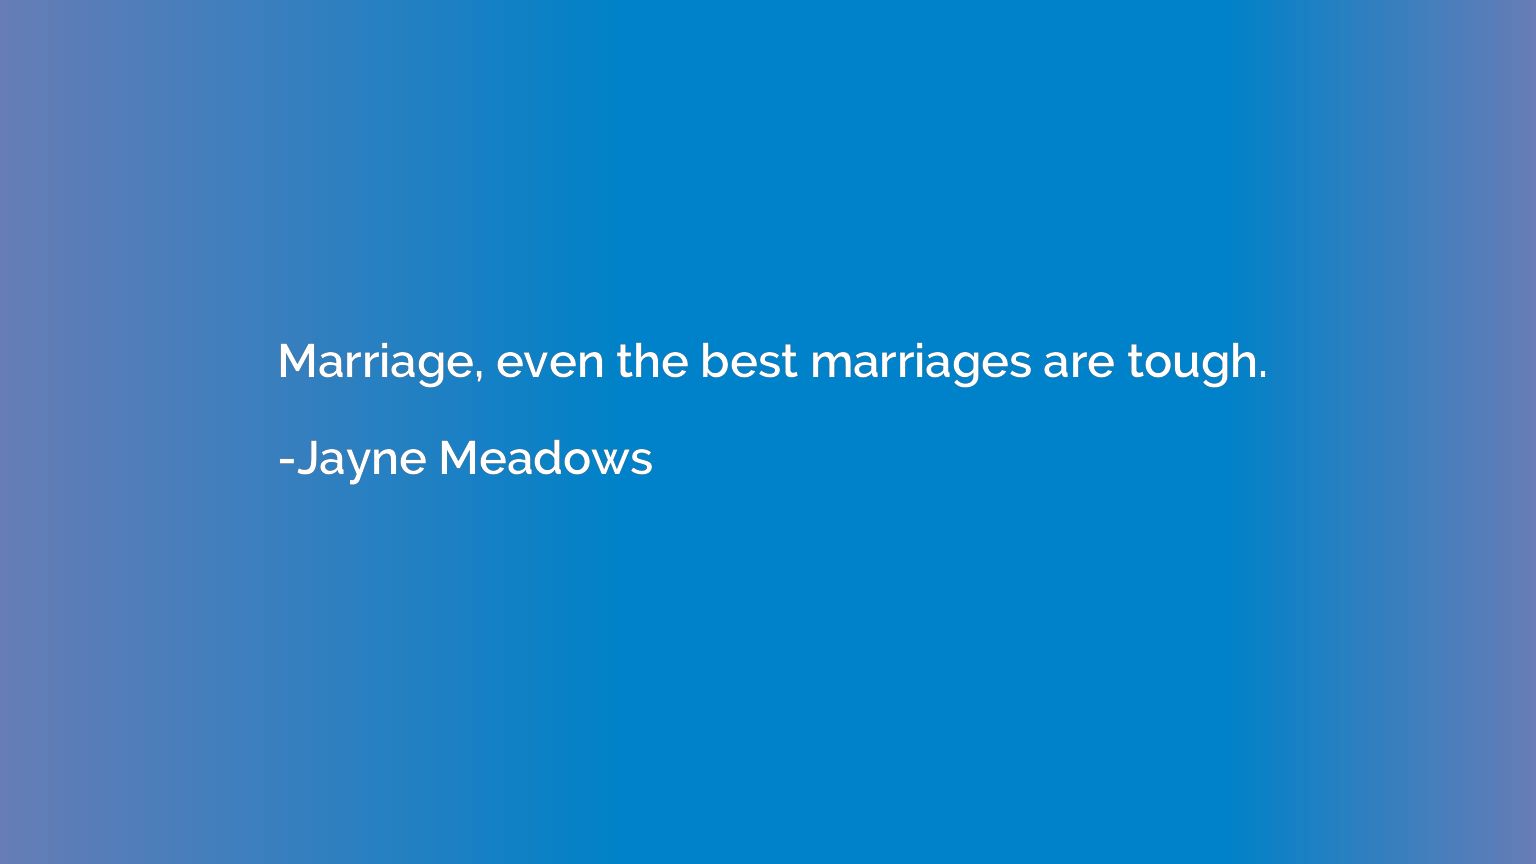 Marriage, even the best marriages are tough.